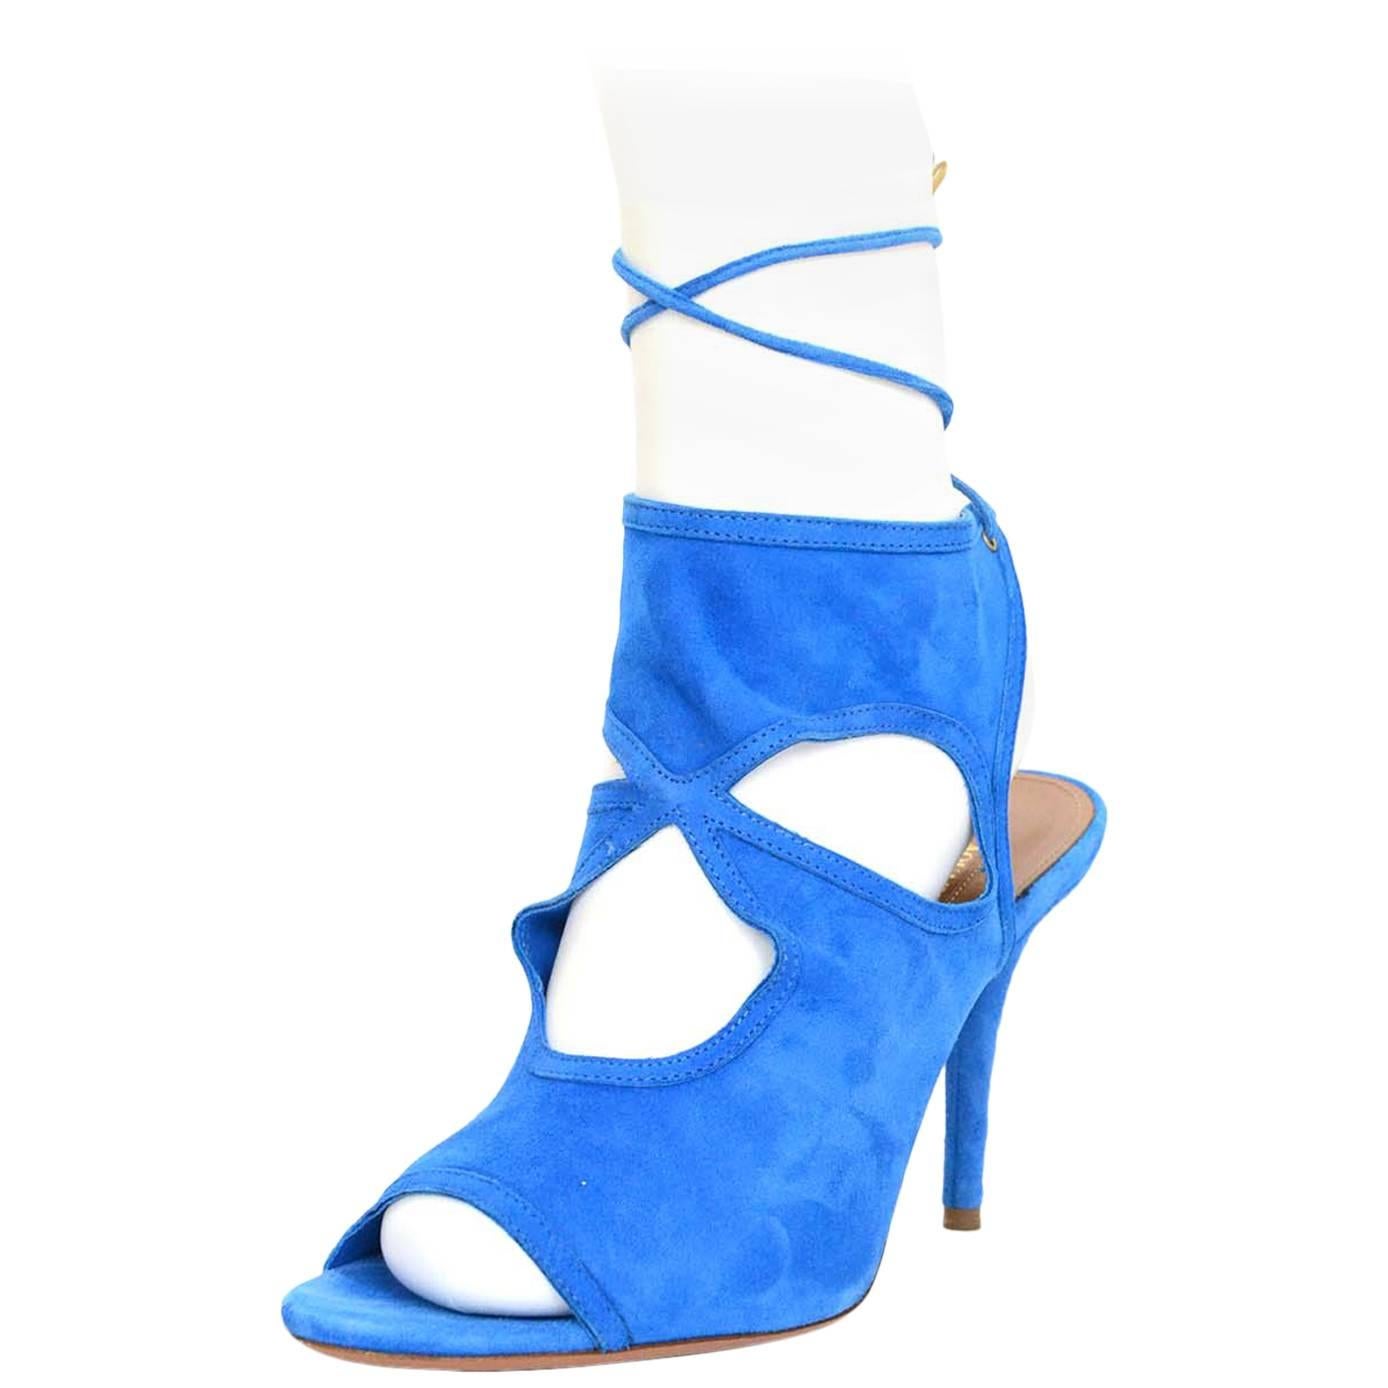 Aquazzura Blue Suede Sexy Thing 105 Cut-Out Sandals sz 38.5 rt. $565